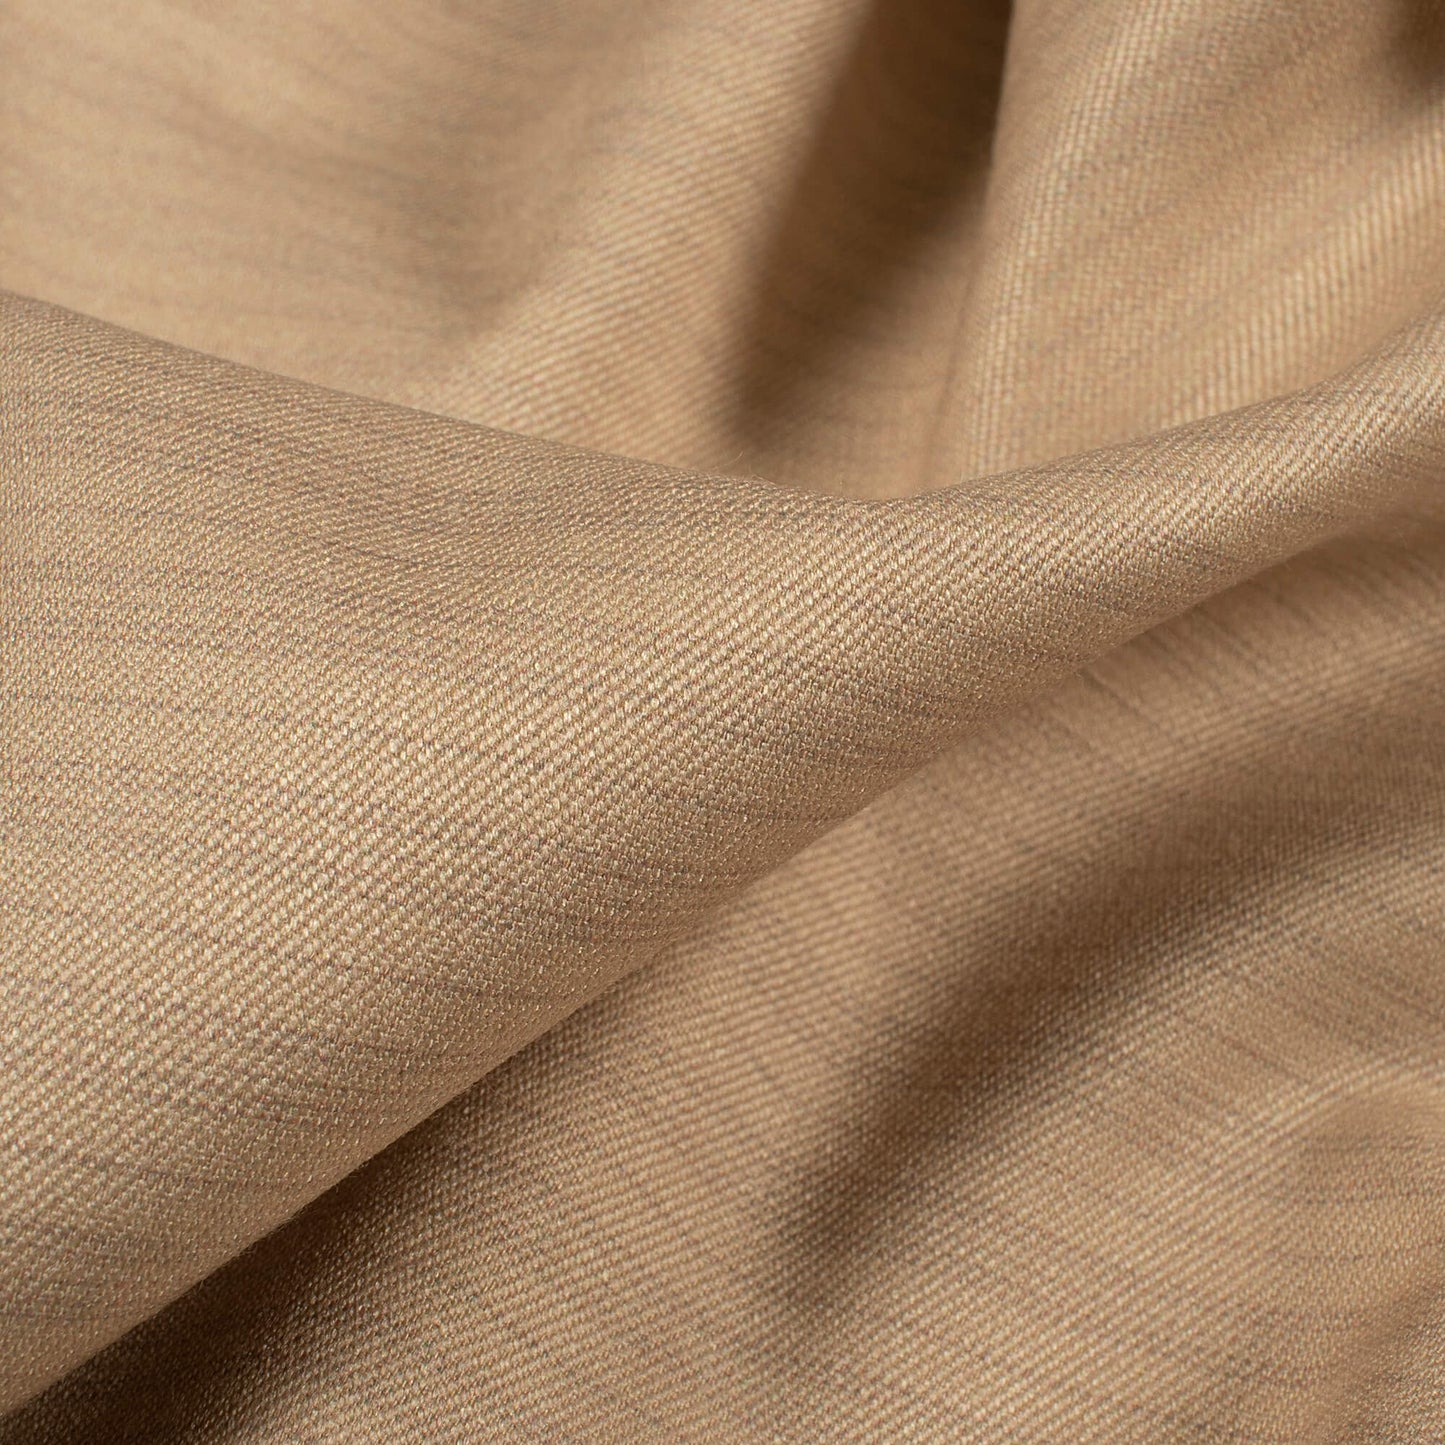 Pastel Brown Stripes Printed Luxury Suiting Fabric